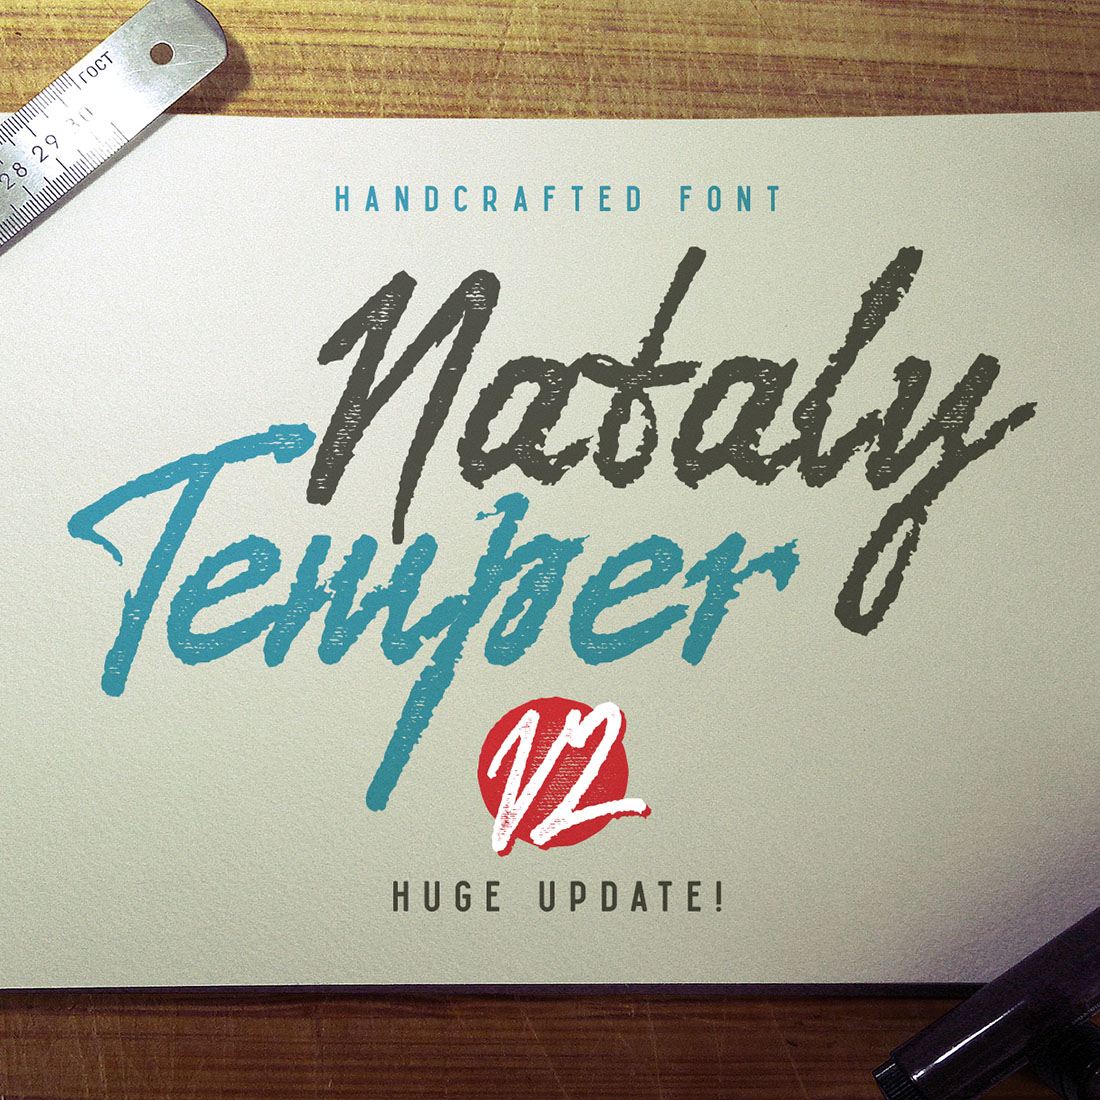 Nataly Temper V.2 Update - main image preview.